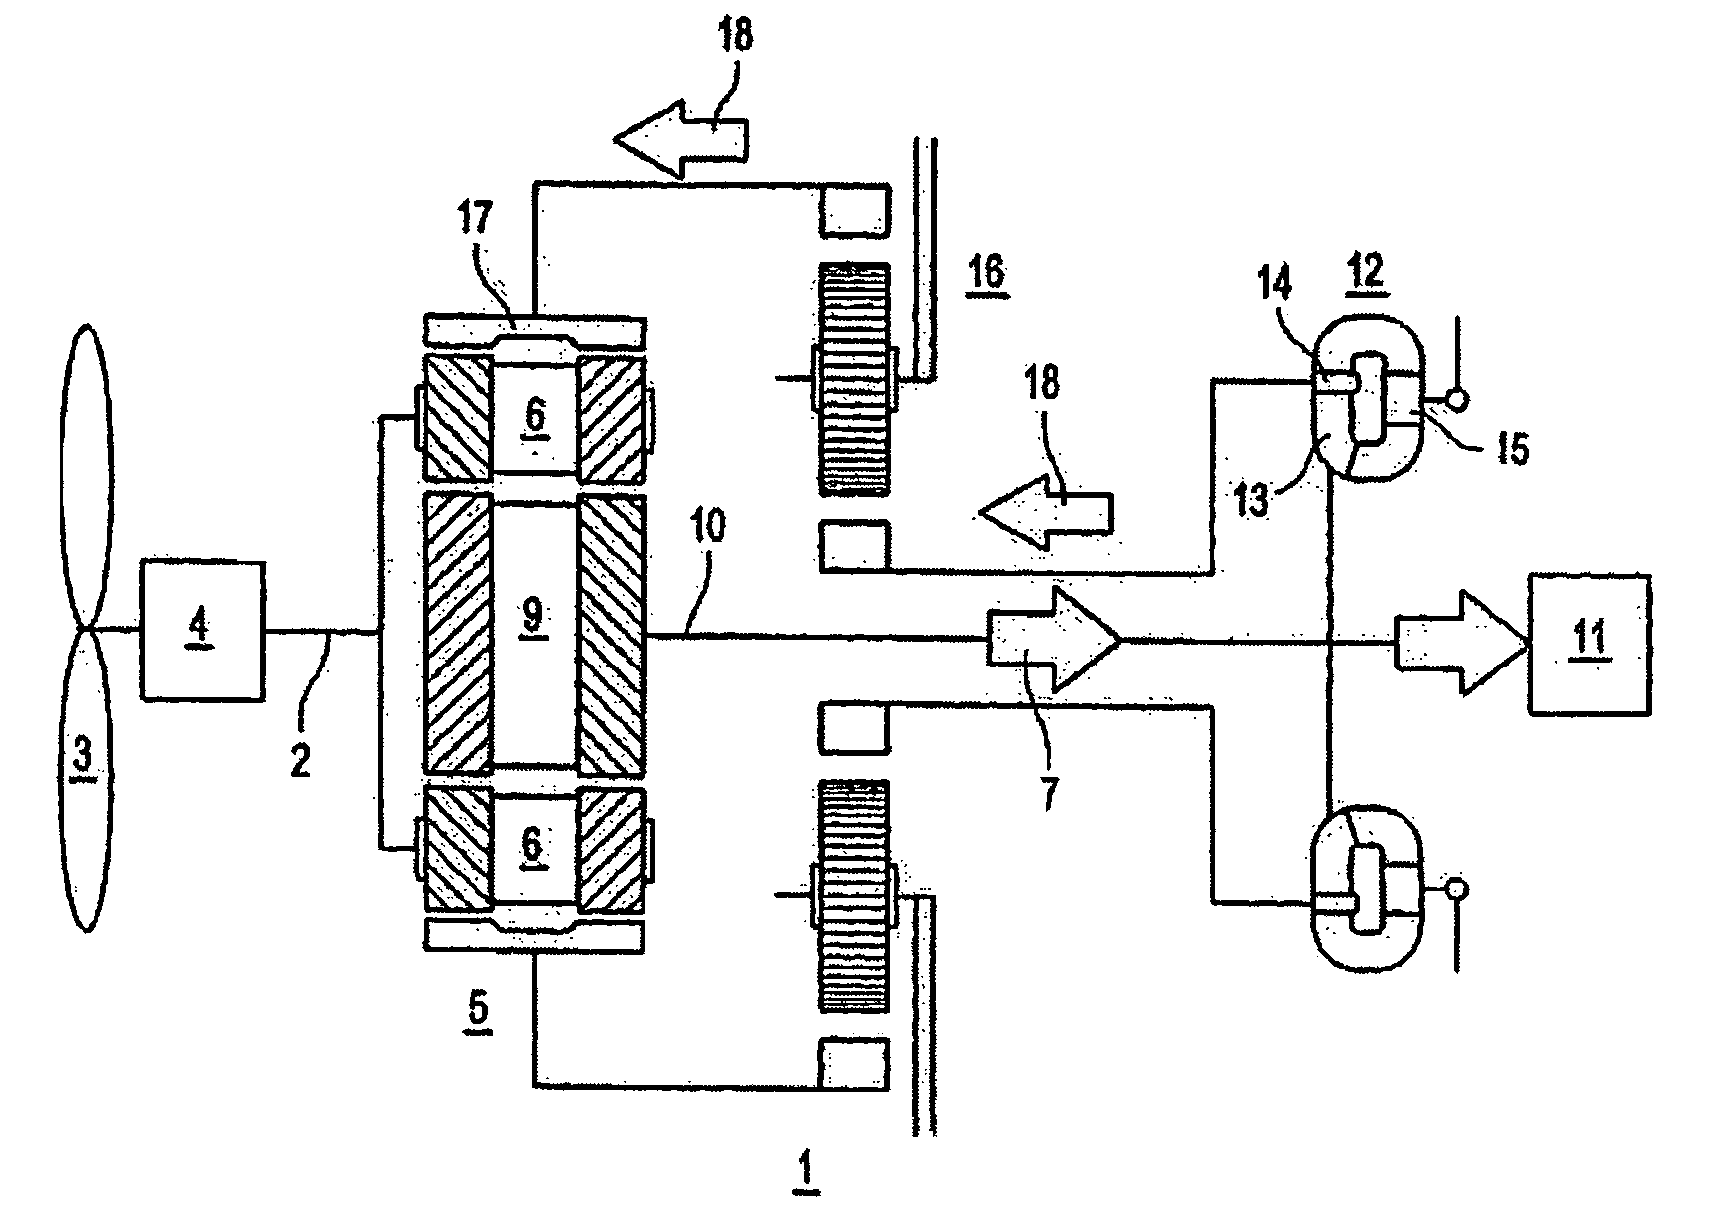 Drive train for the transmission of a variable power